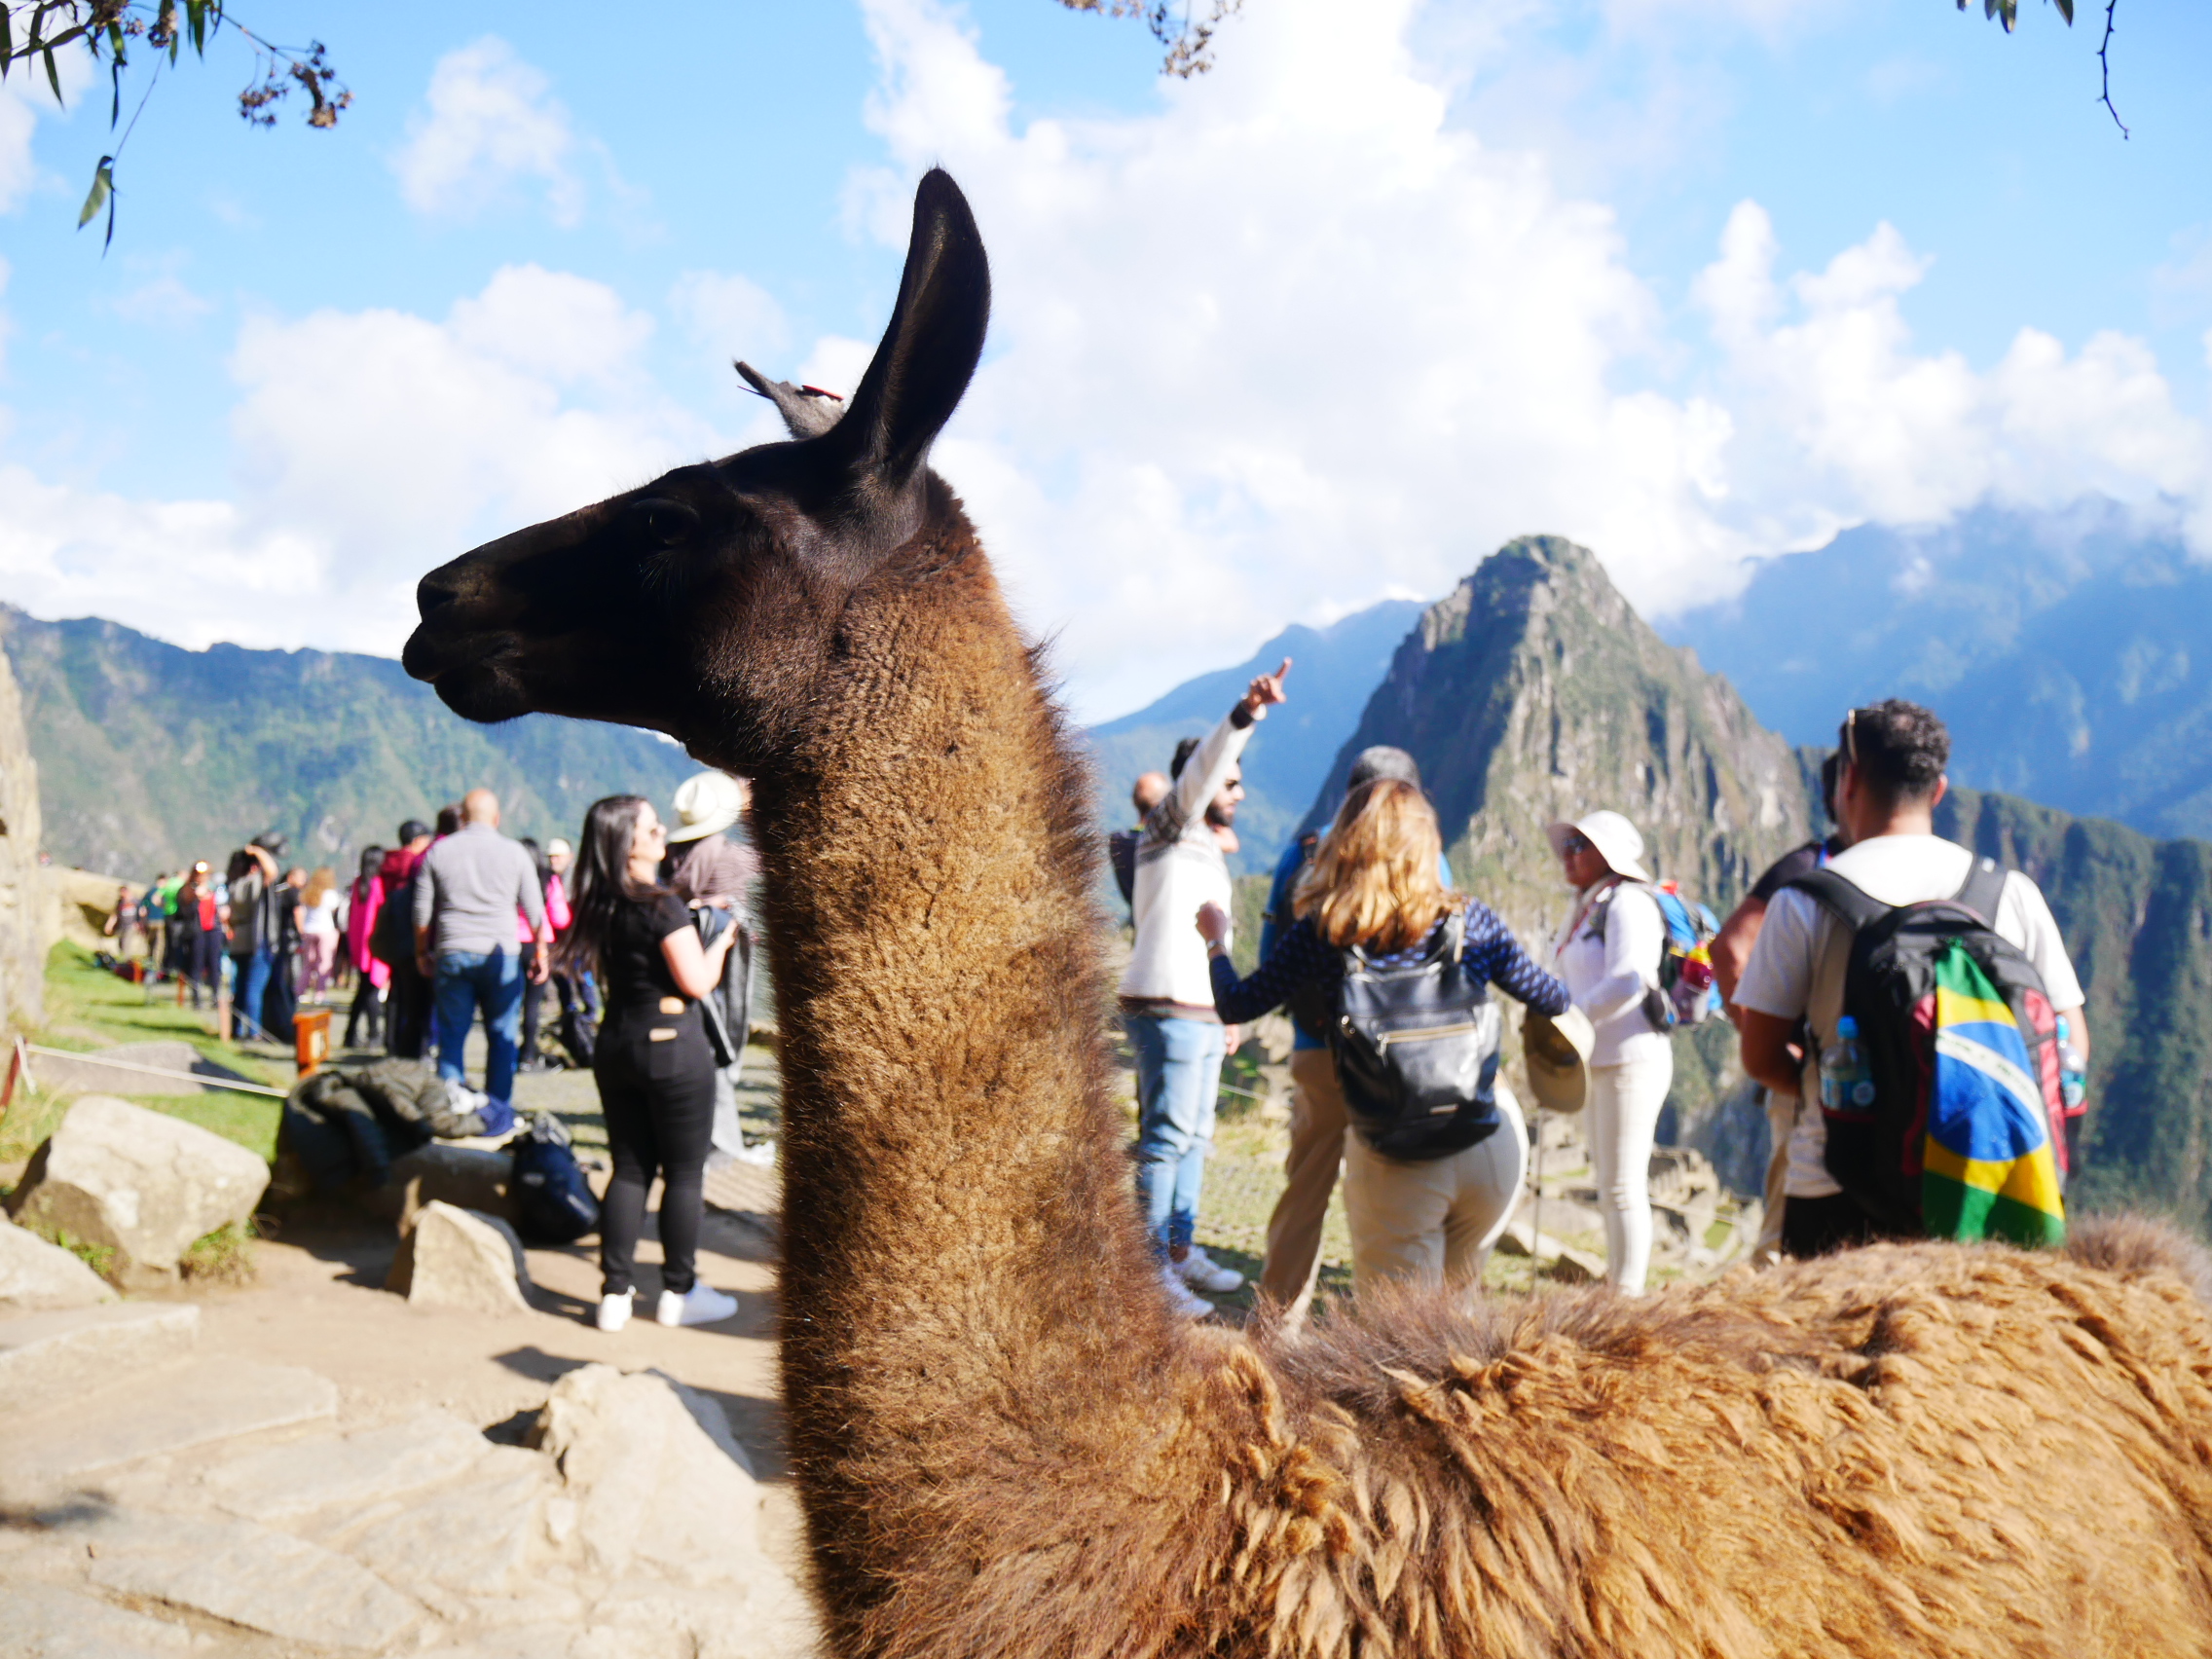 How to travel to Machu Picchu on a budget